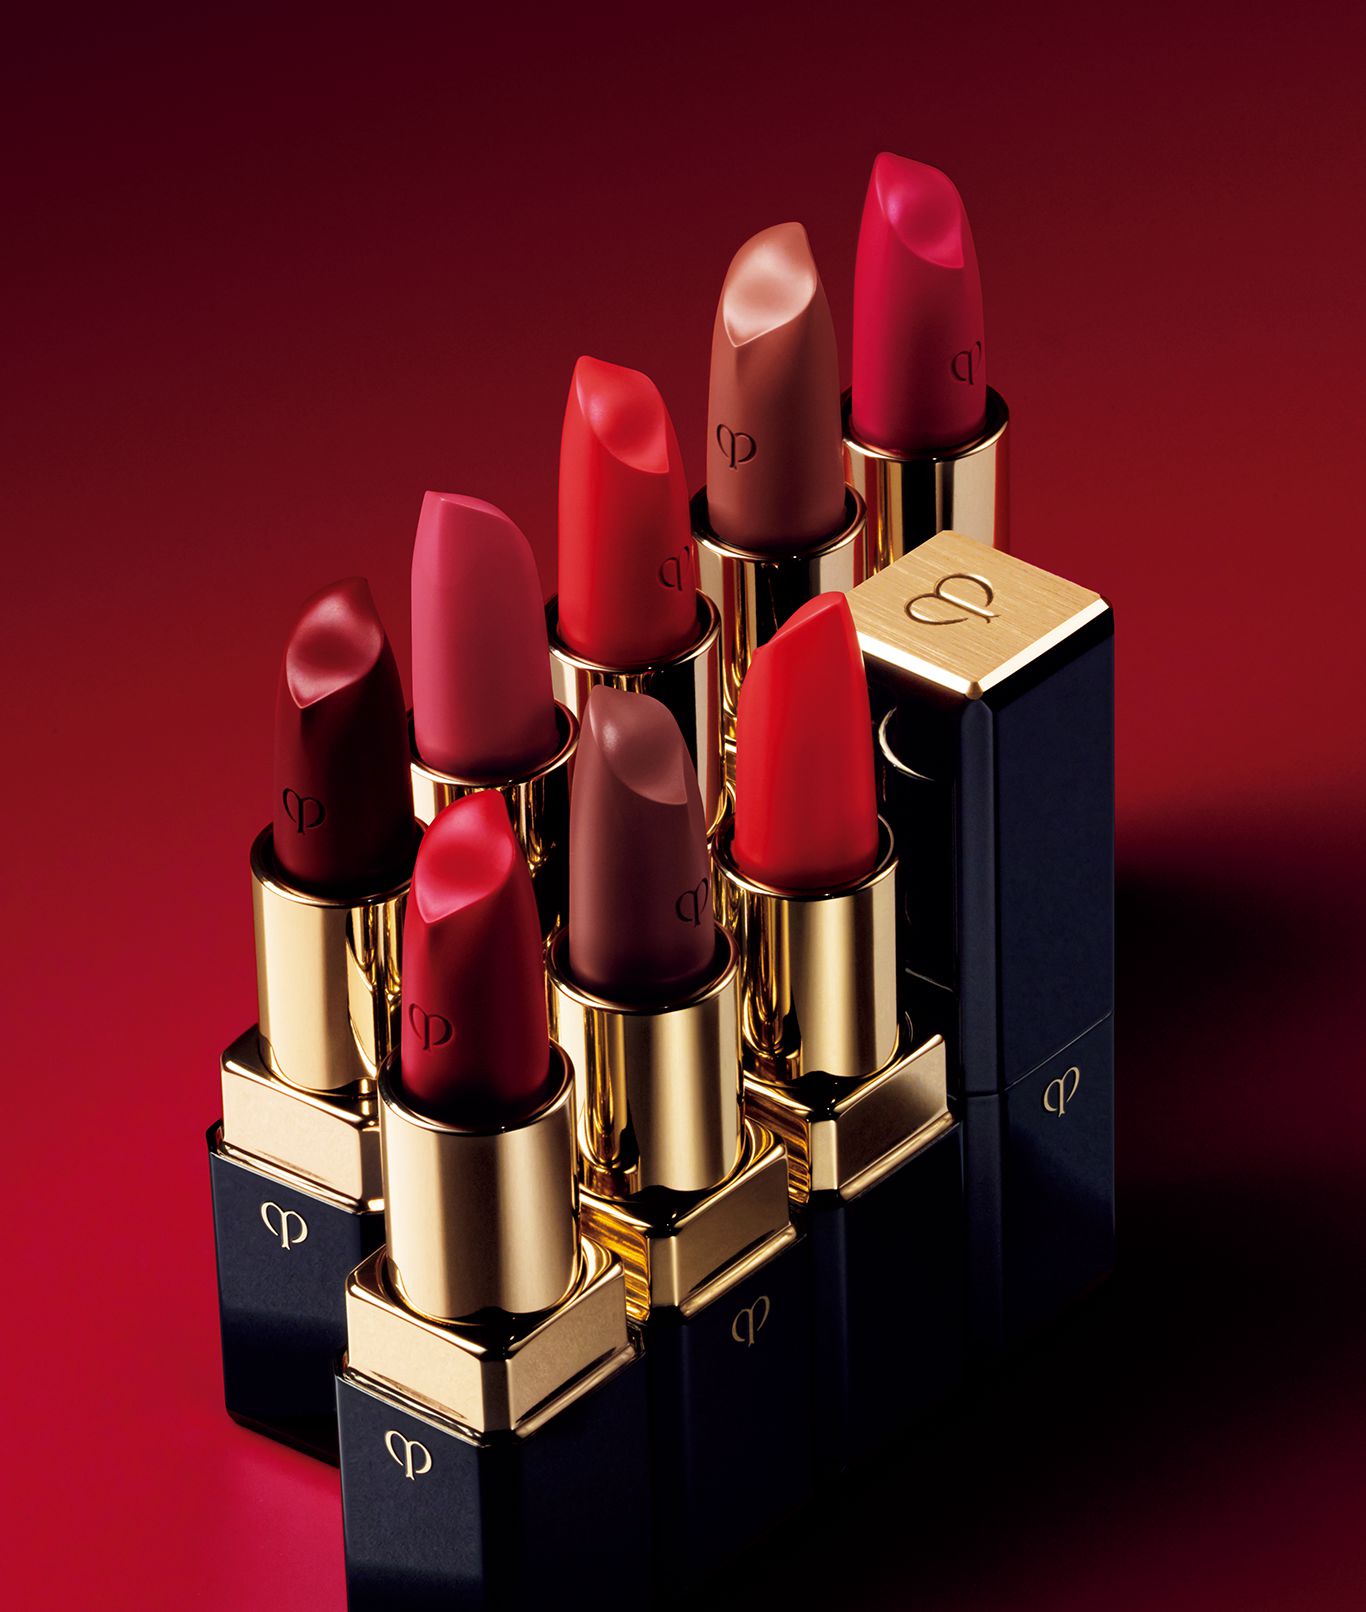 5 New Rouge Lipsticks We Are Crazy About